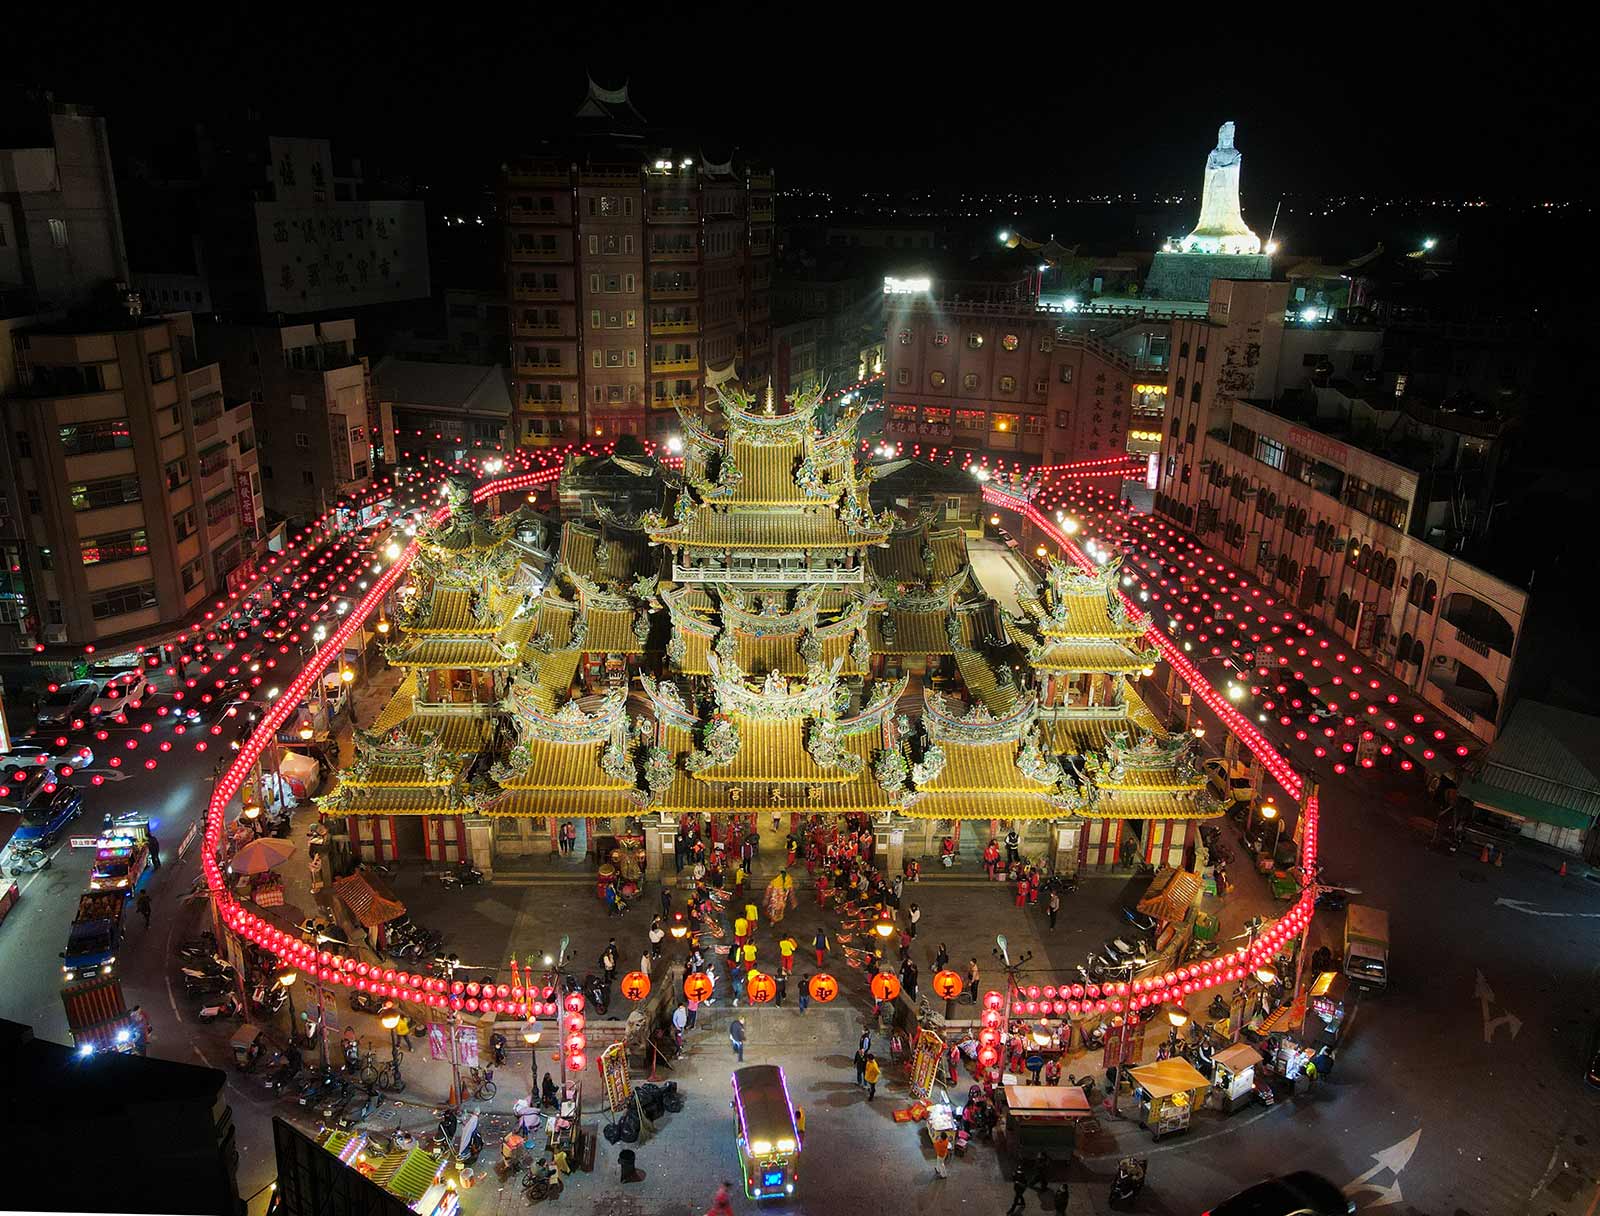 Chaotian Temple, seen from above, stands surrounded by rows of red lanterns suspended above the street.